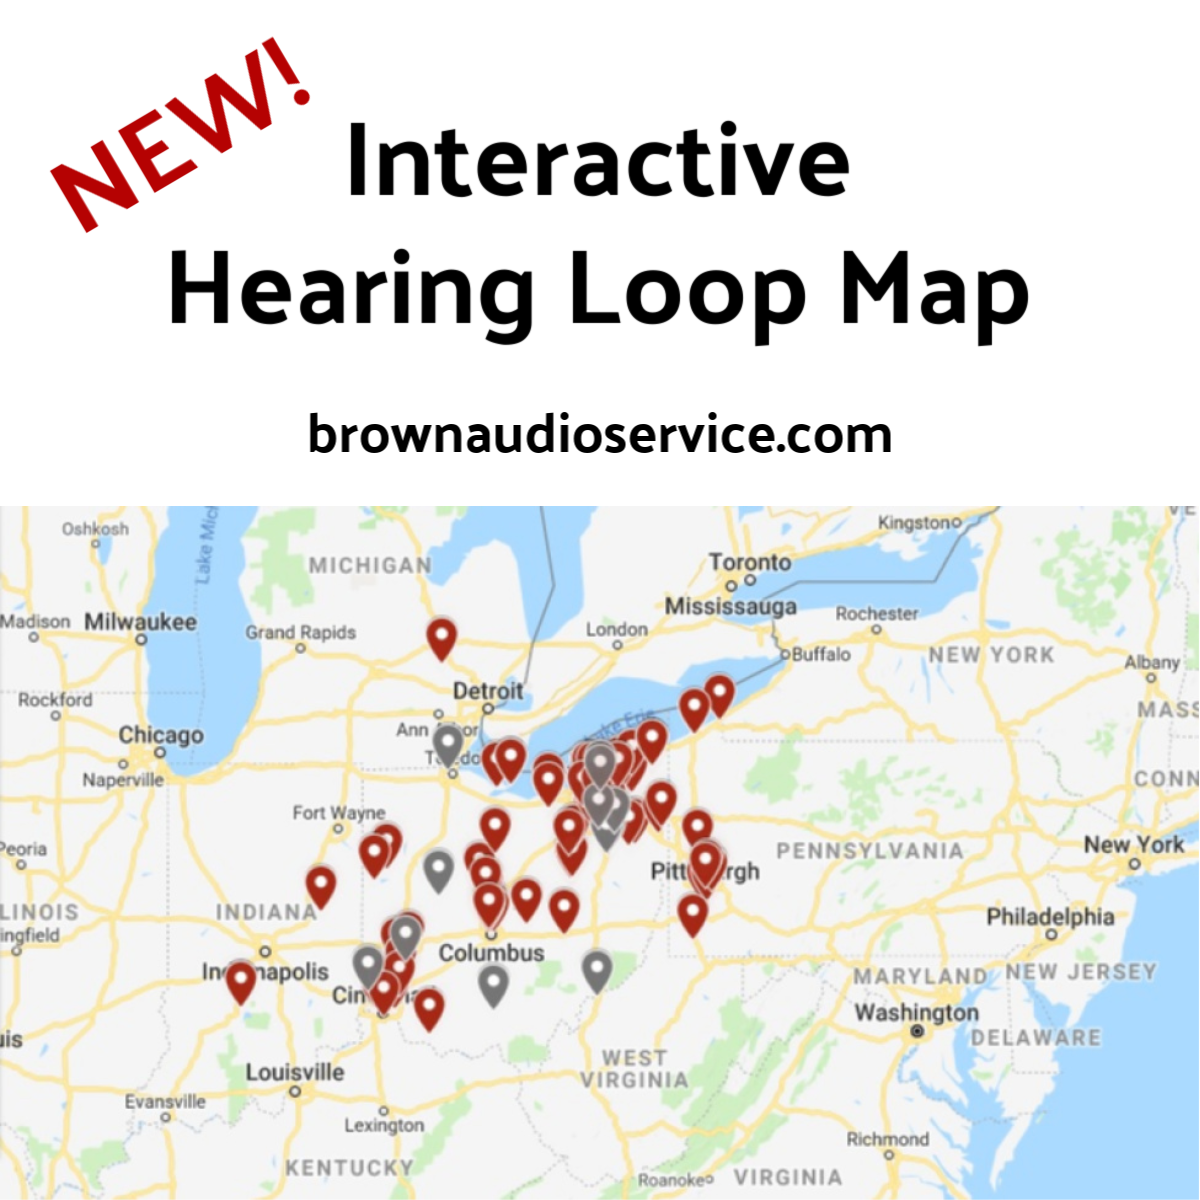 Putting Hearing Loops on the Map